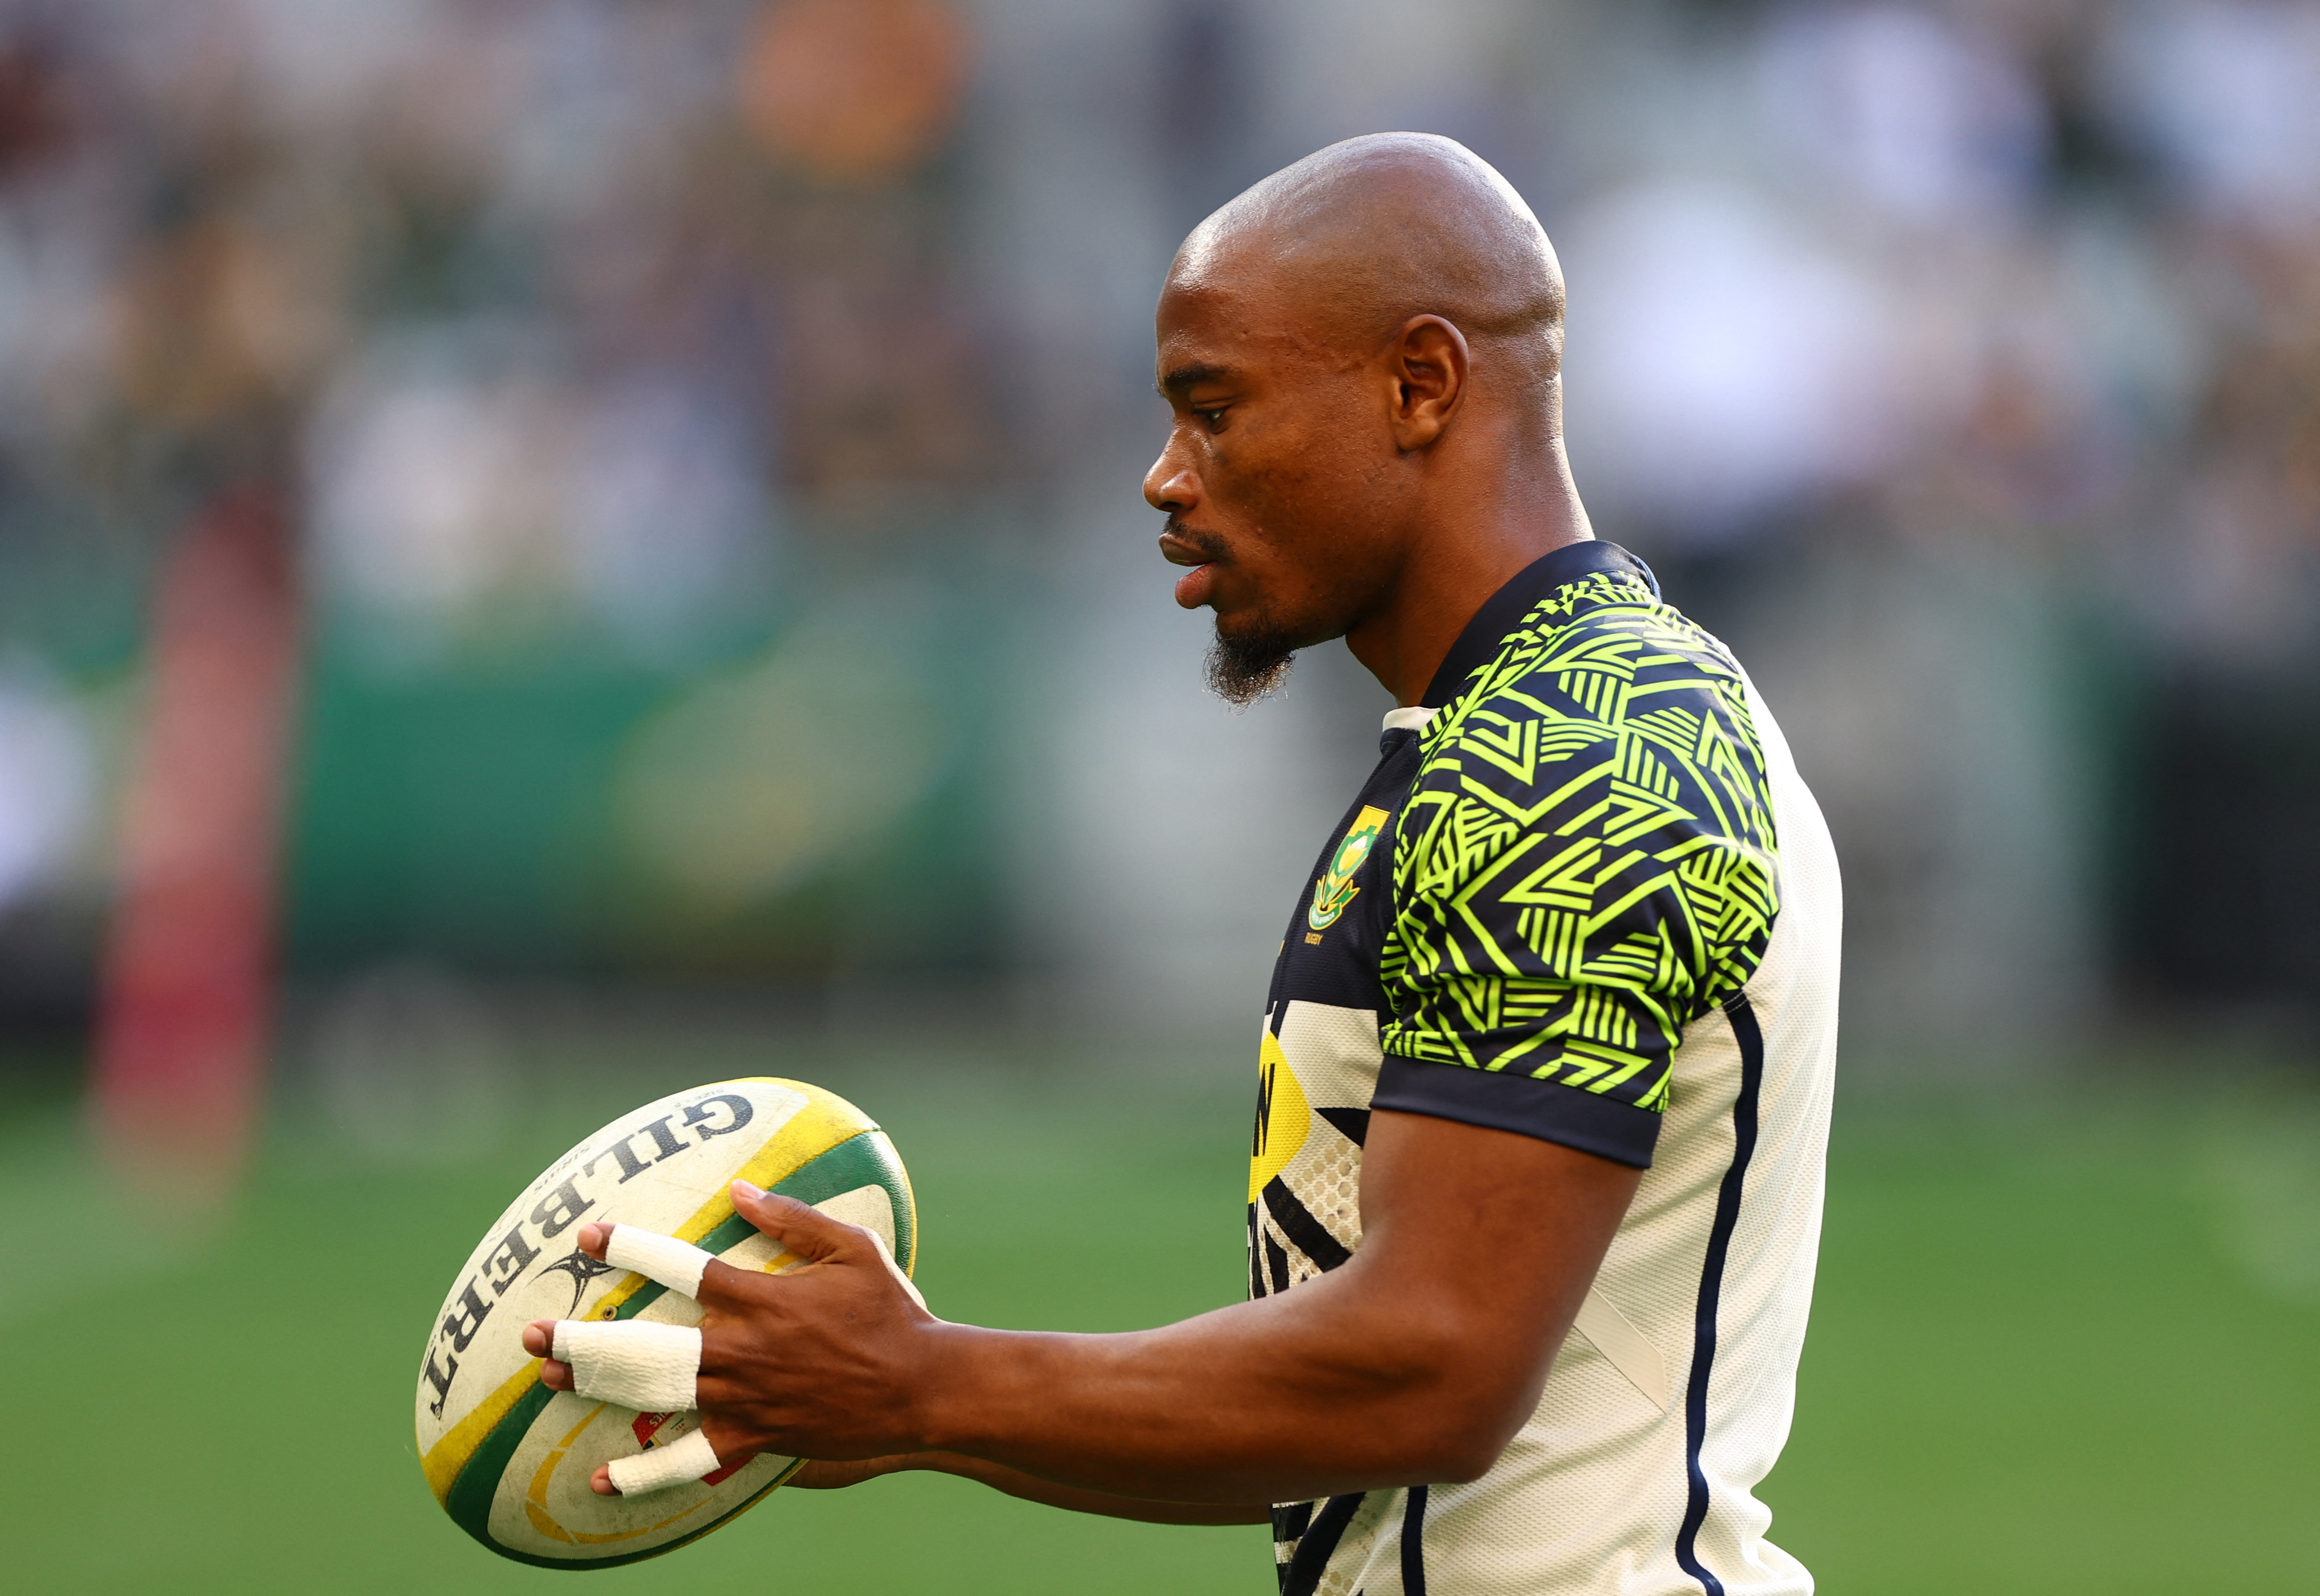 South Africa wing Mapimpi ruled out of World Cup Reuters